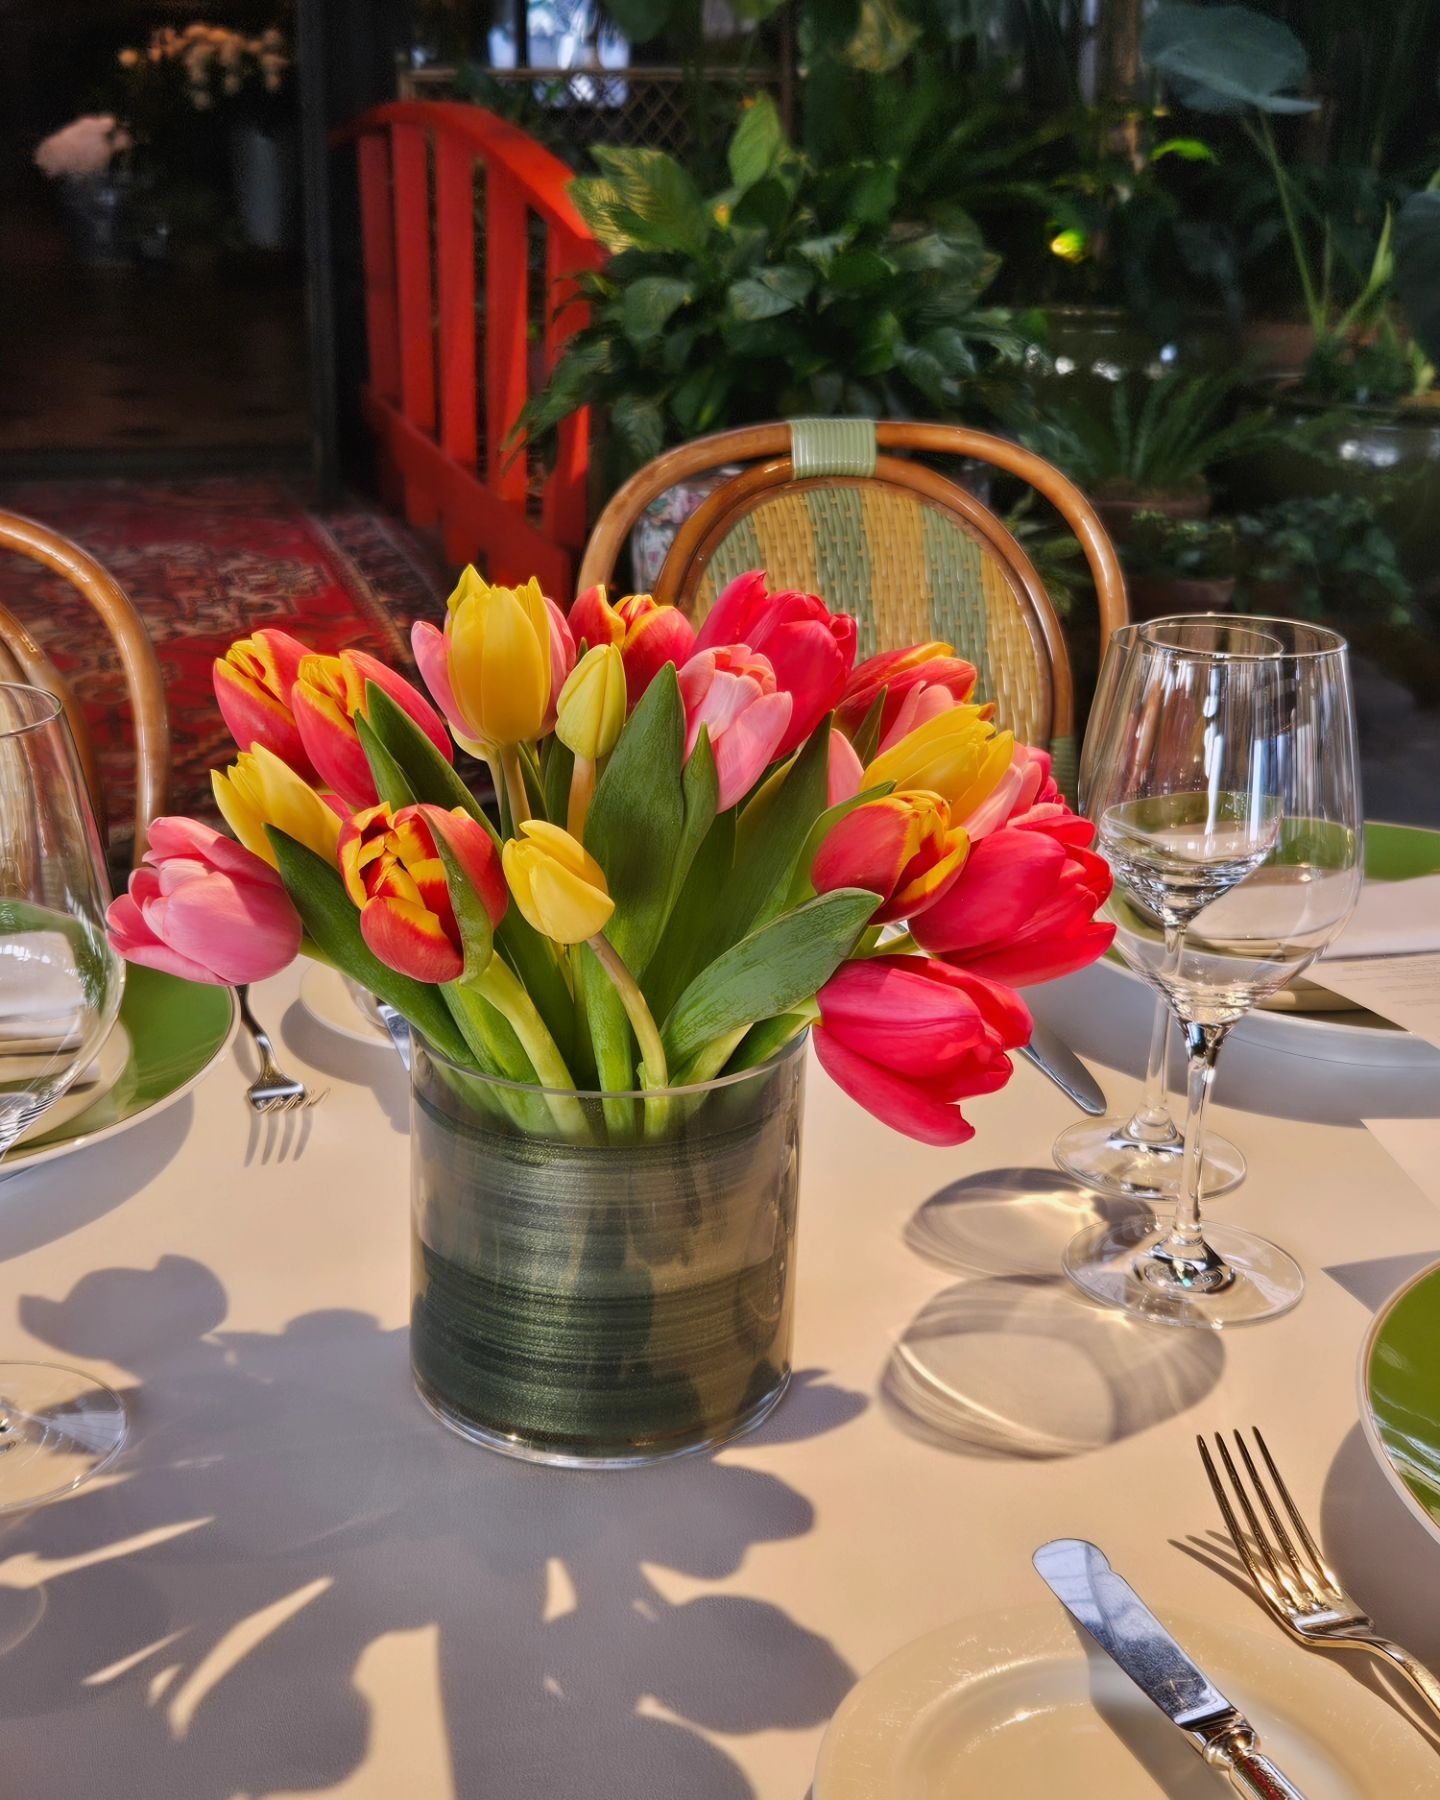 It's wedding season!

Our tulips took center stage a dinner party this spring at The River Caf&eacute; in Brooklyn, NY. 

What flowers will star at your event?

Hire Brooklyn Flower Shop to make your floral dreams come true ✨️